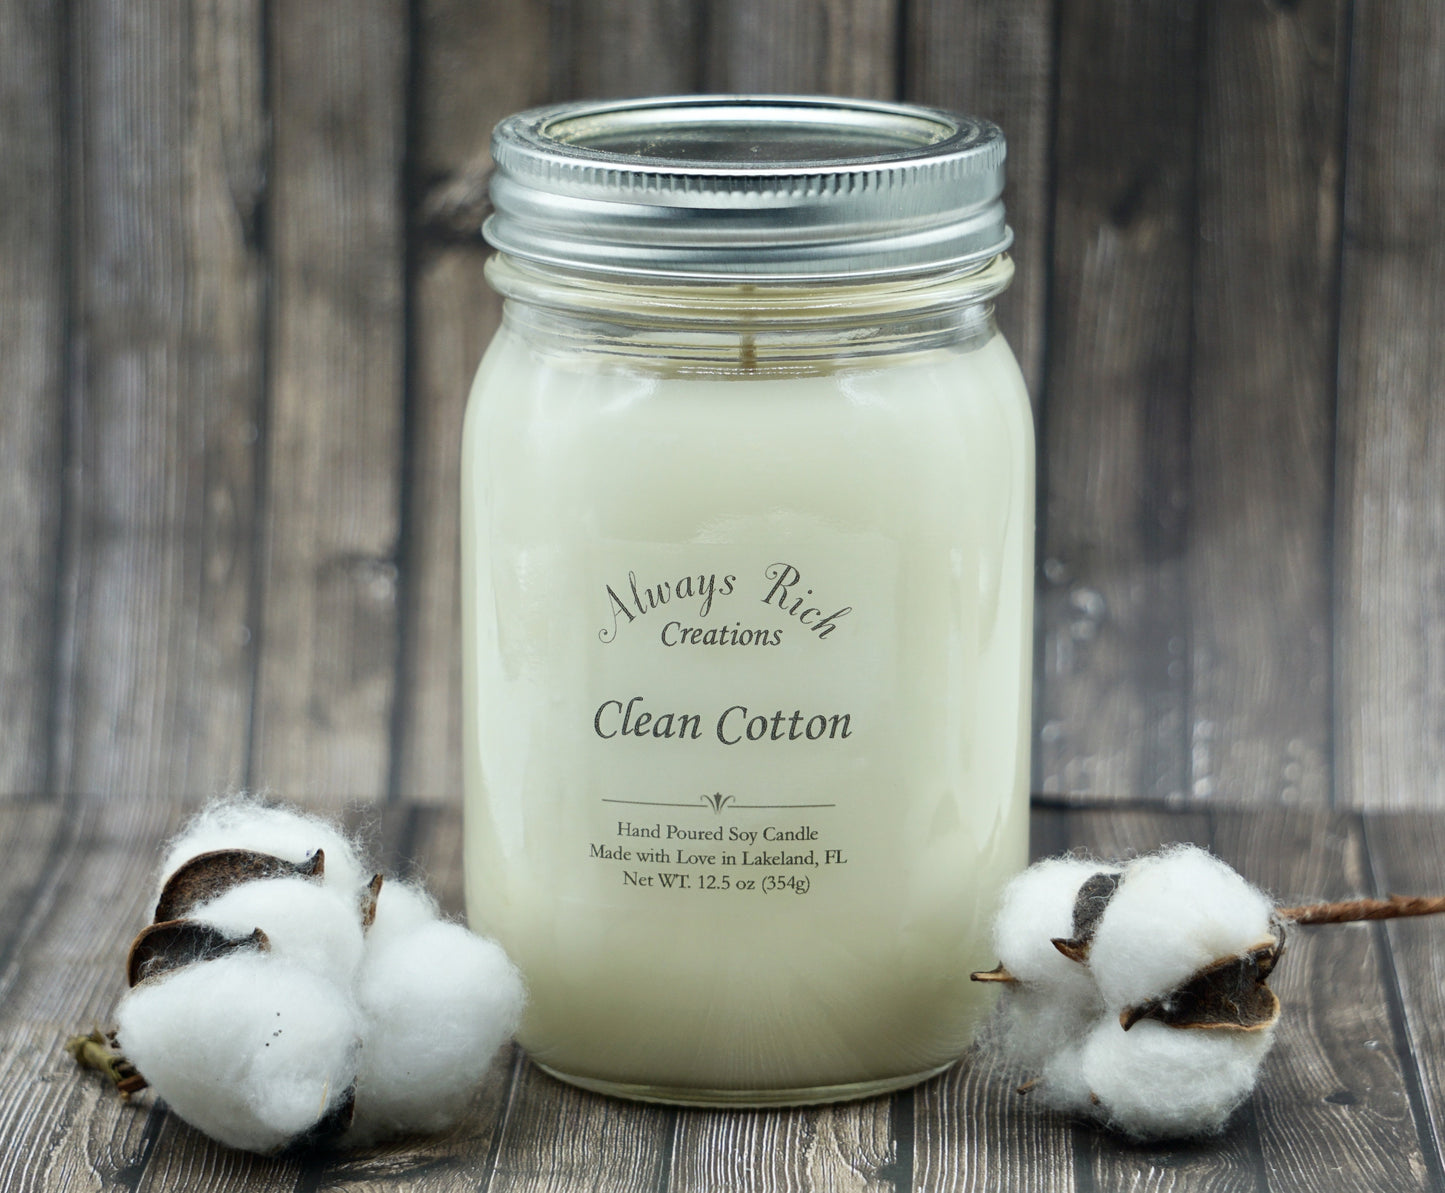 Clean Cotton Collection - Always Rich Creations